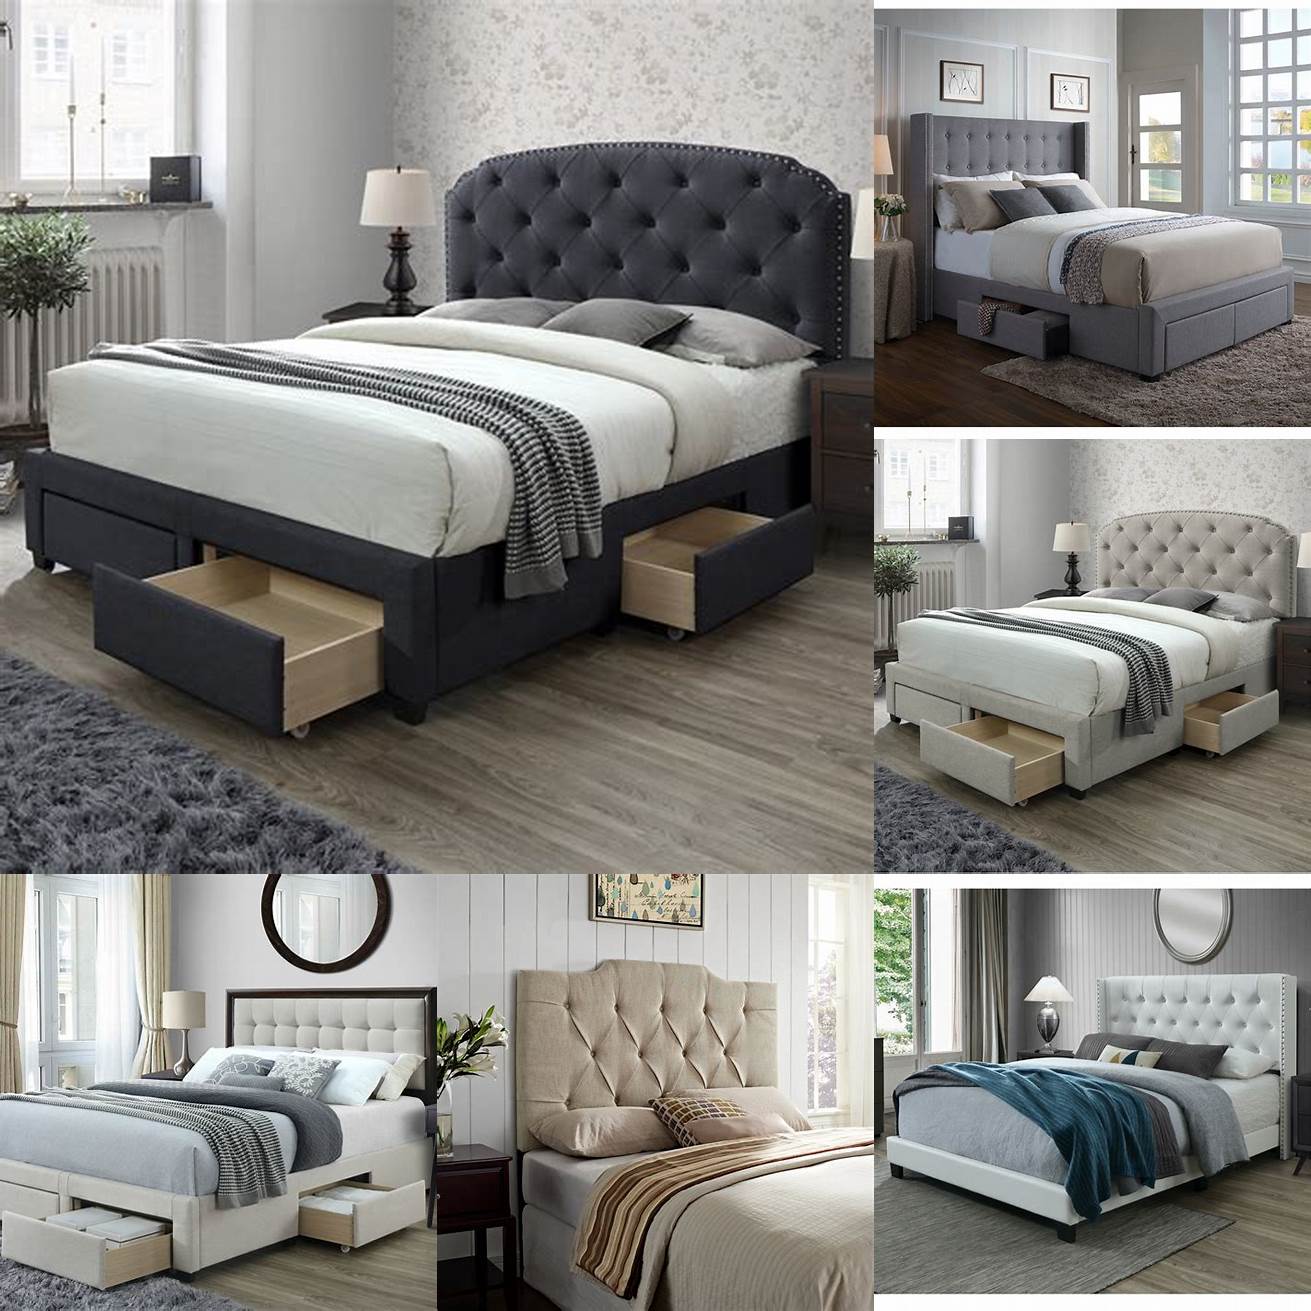 Image of a king size storage bed with a tufted headboard